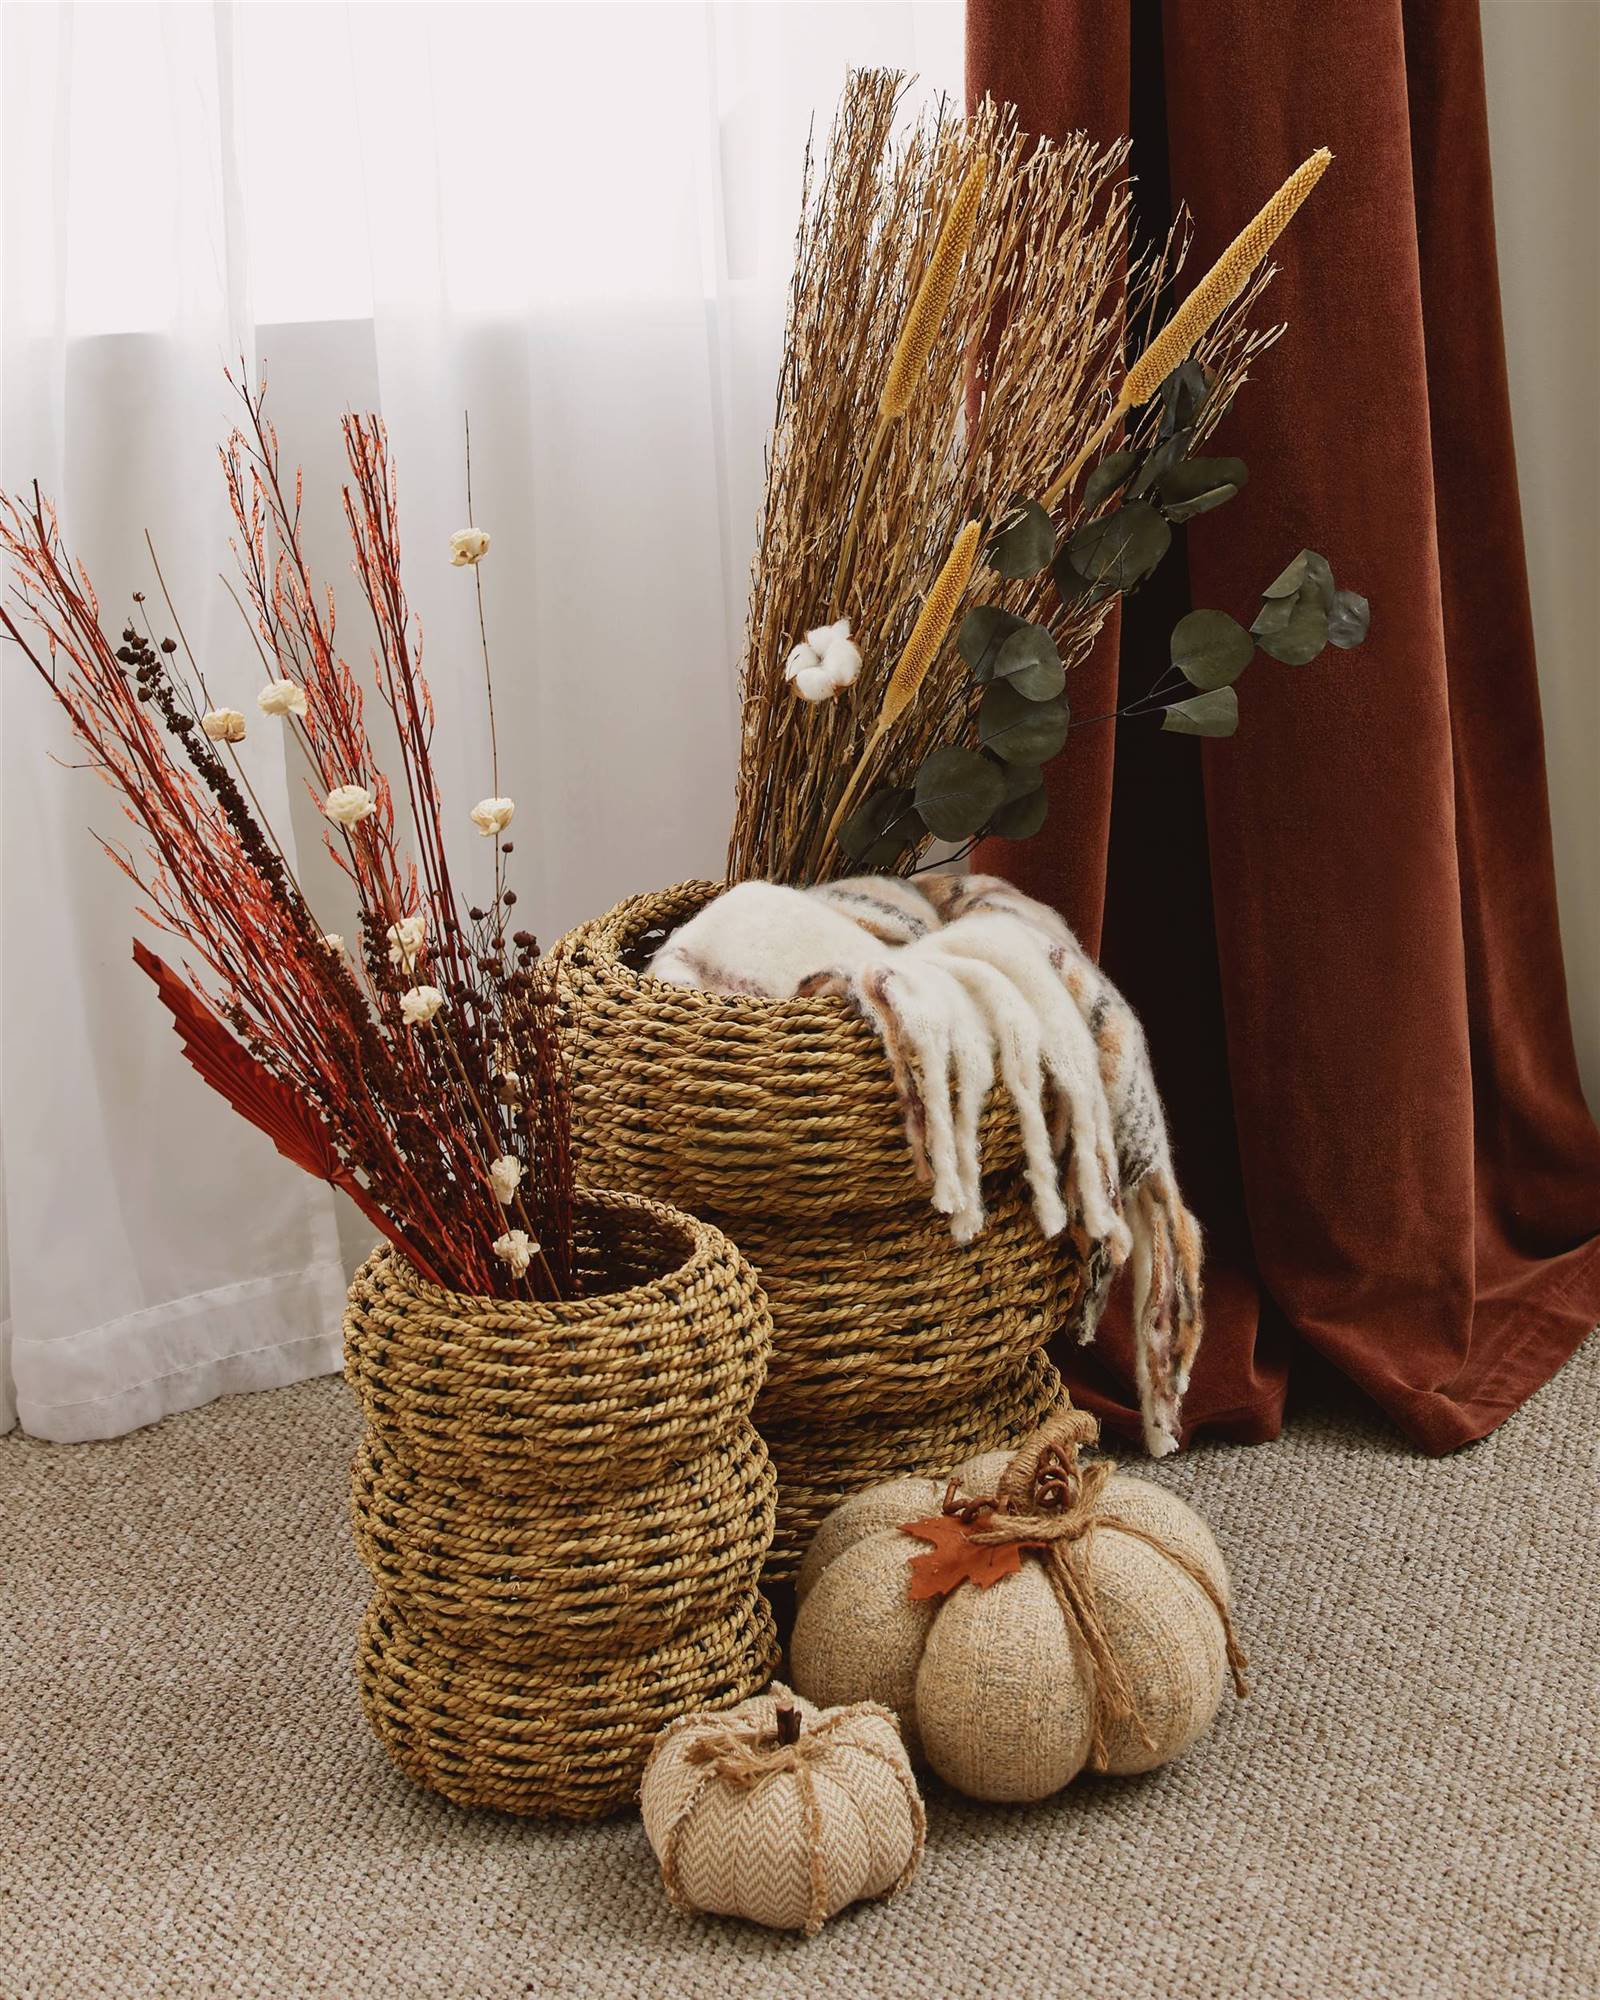 baskets with dry plants